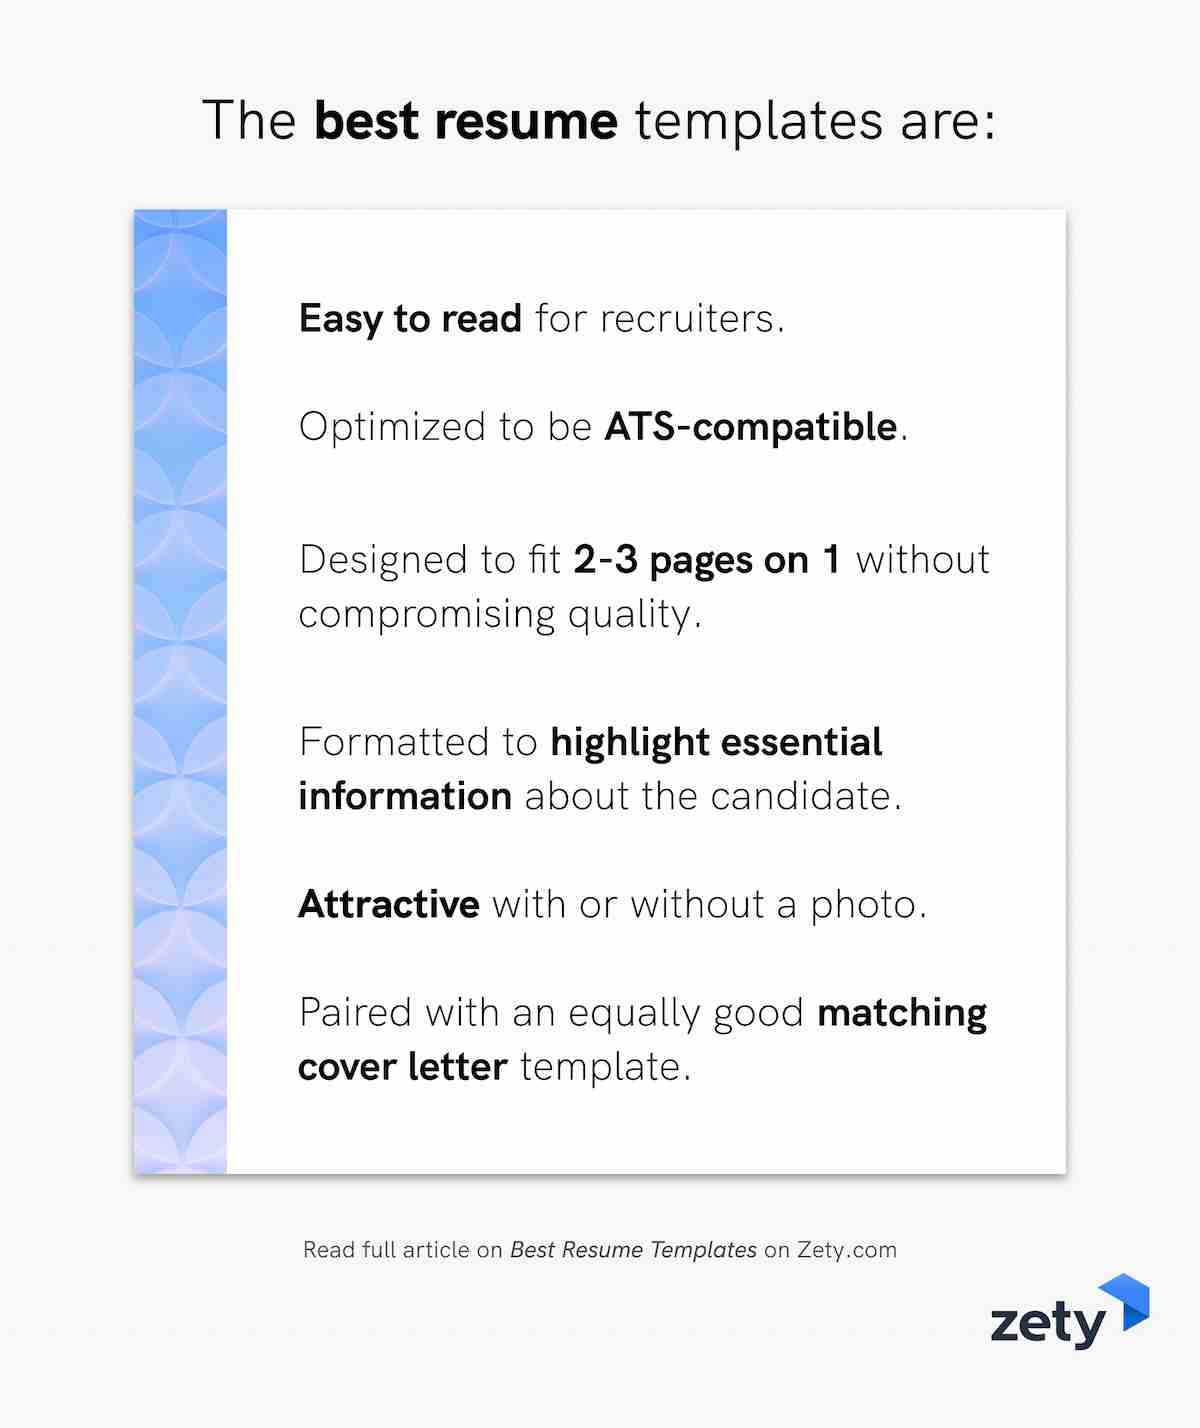 The best resume templates should be